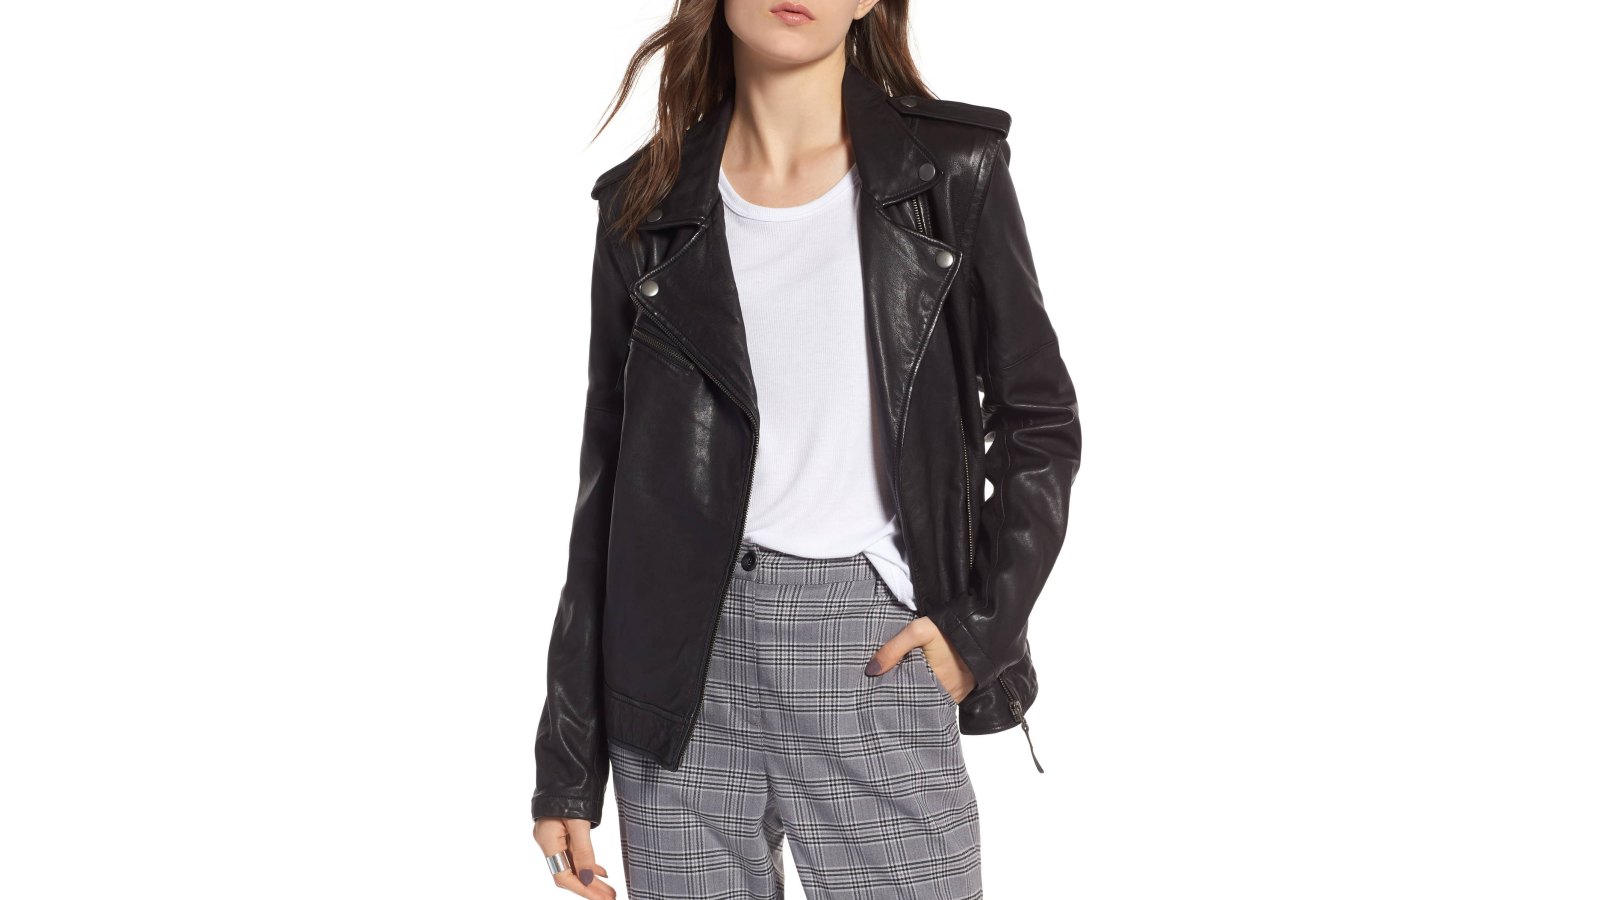 This Convertible Leather Jacket Is Two Outerwear Pieces in One